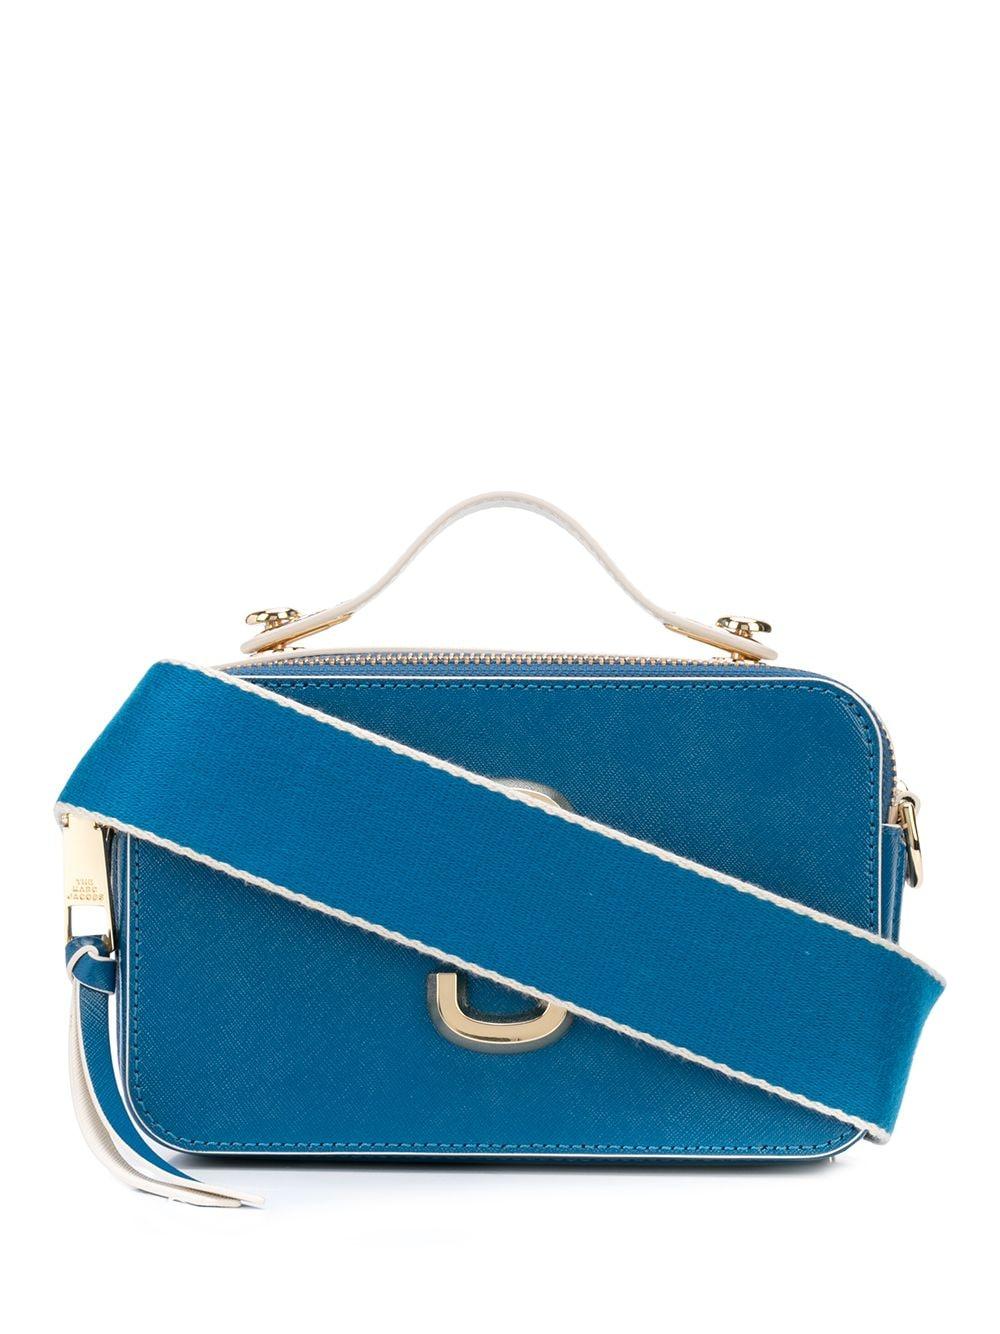 Marc Jacobs Leather The Sure Shot Bag in Blue - Lyst